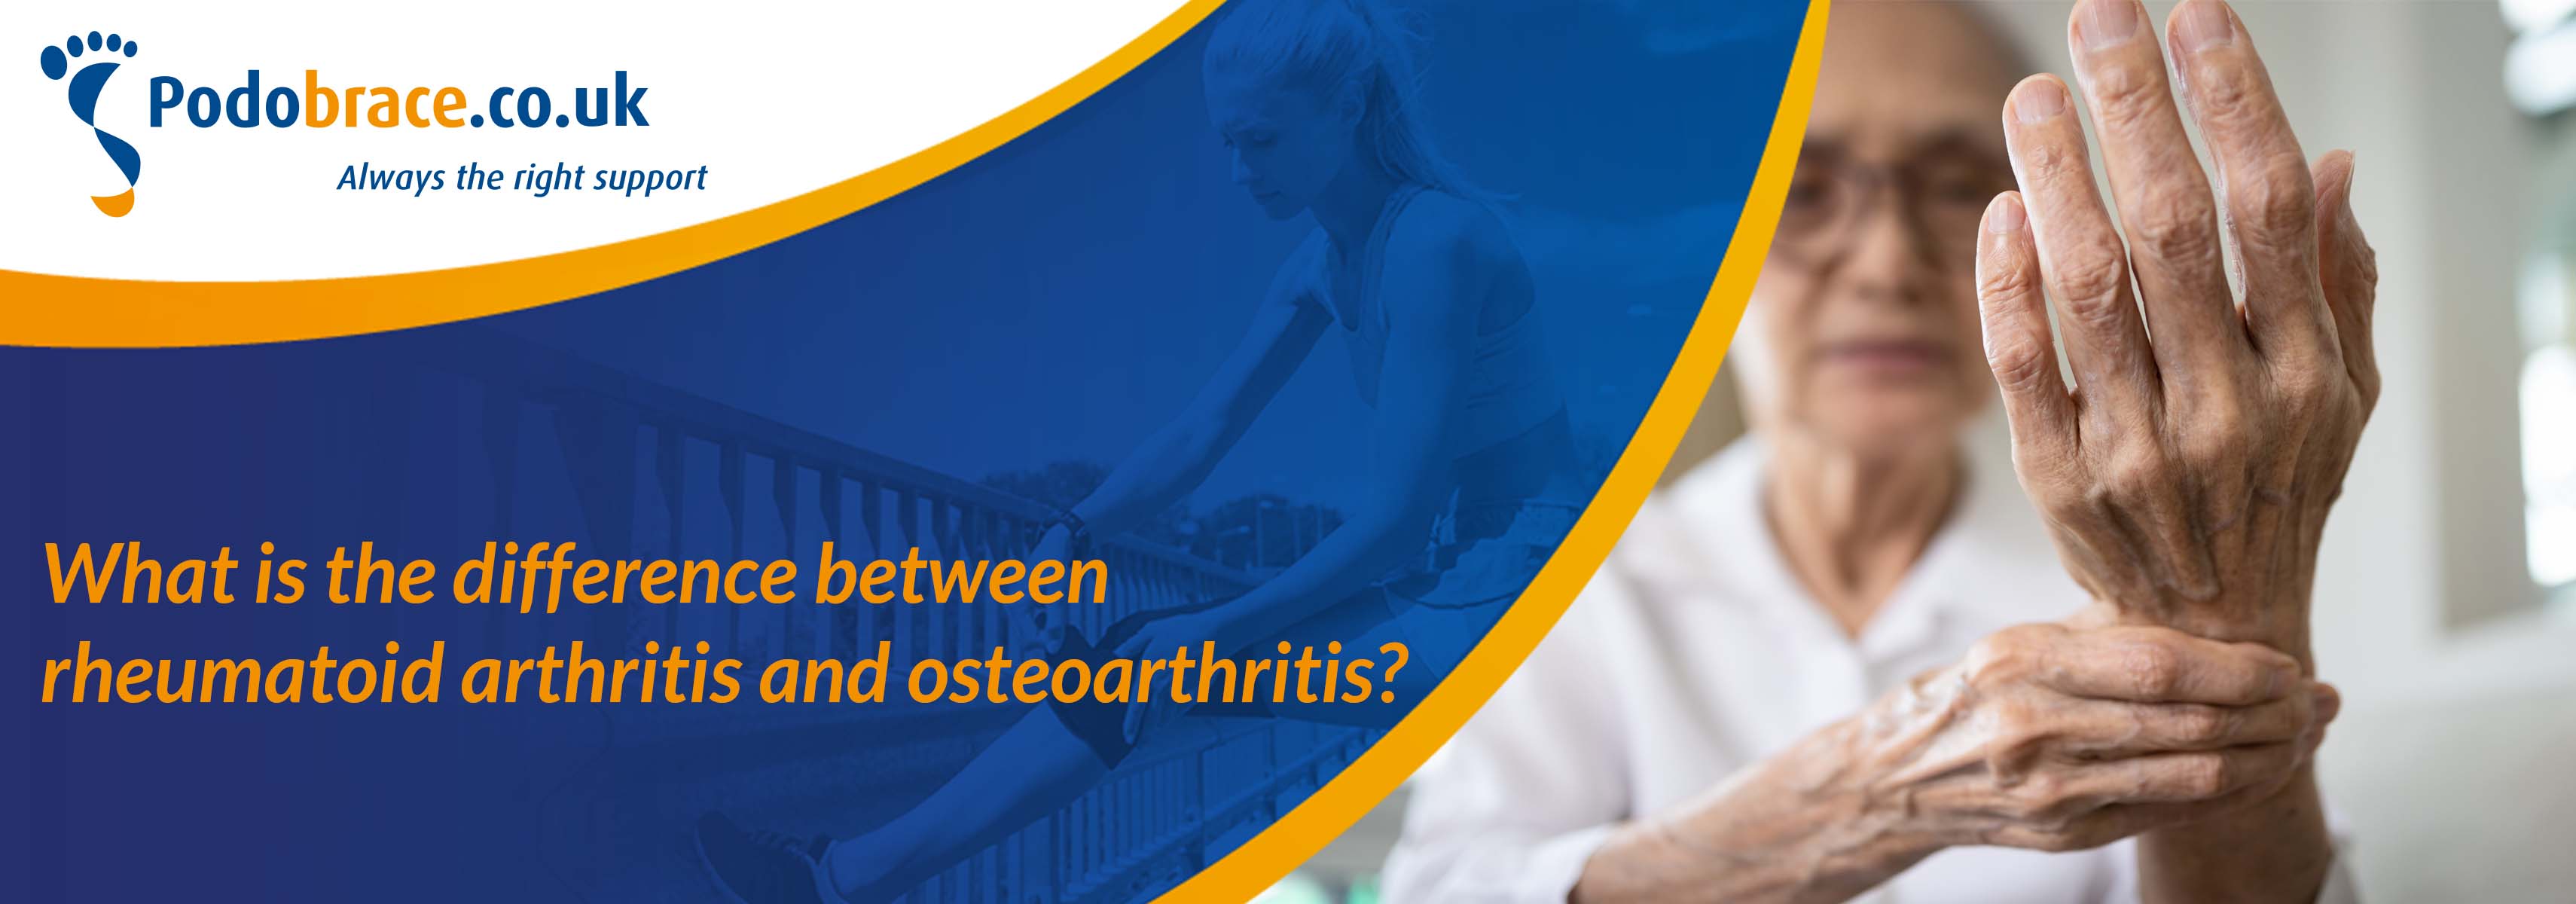 What is the difference between rheumatoid arthritis and osteoarthritis